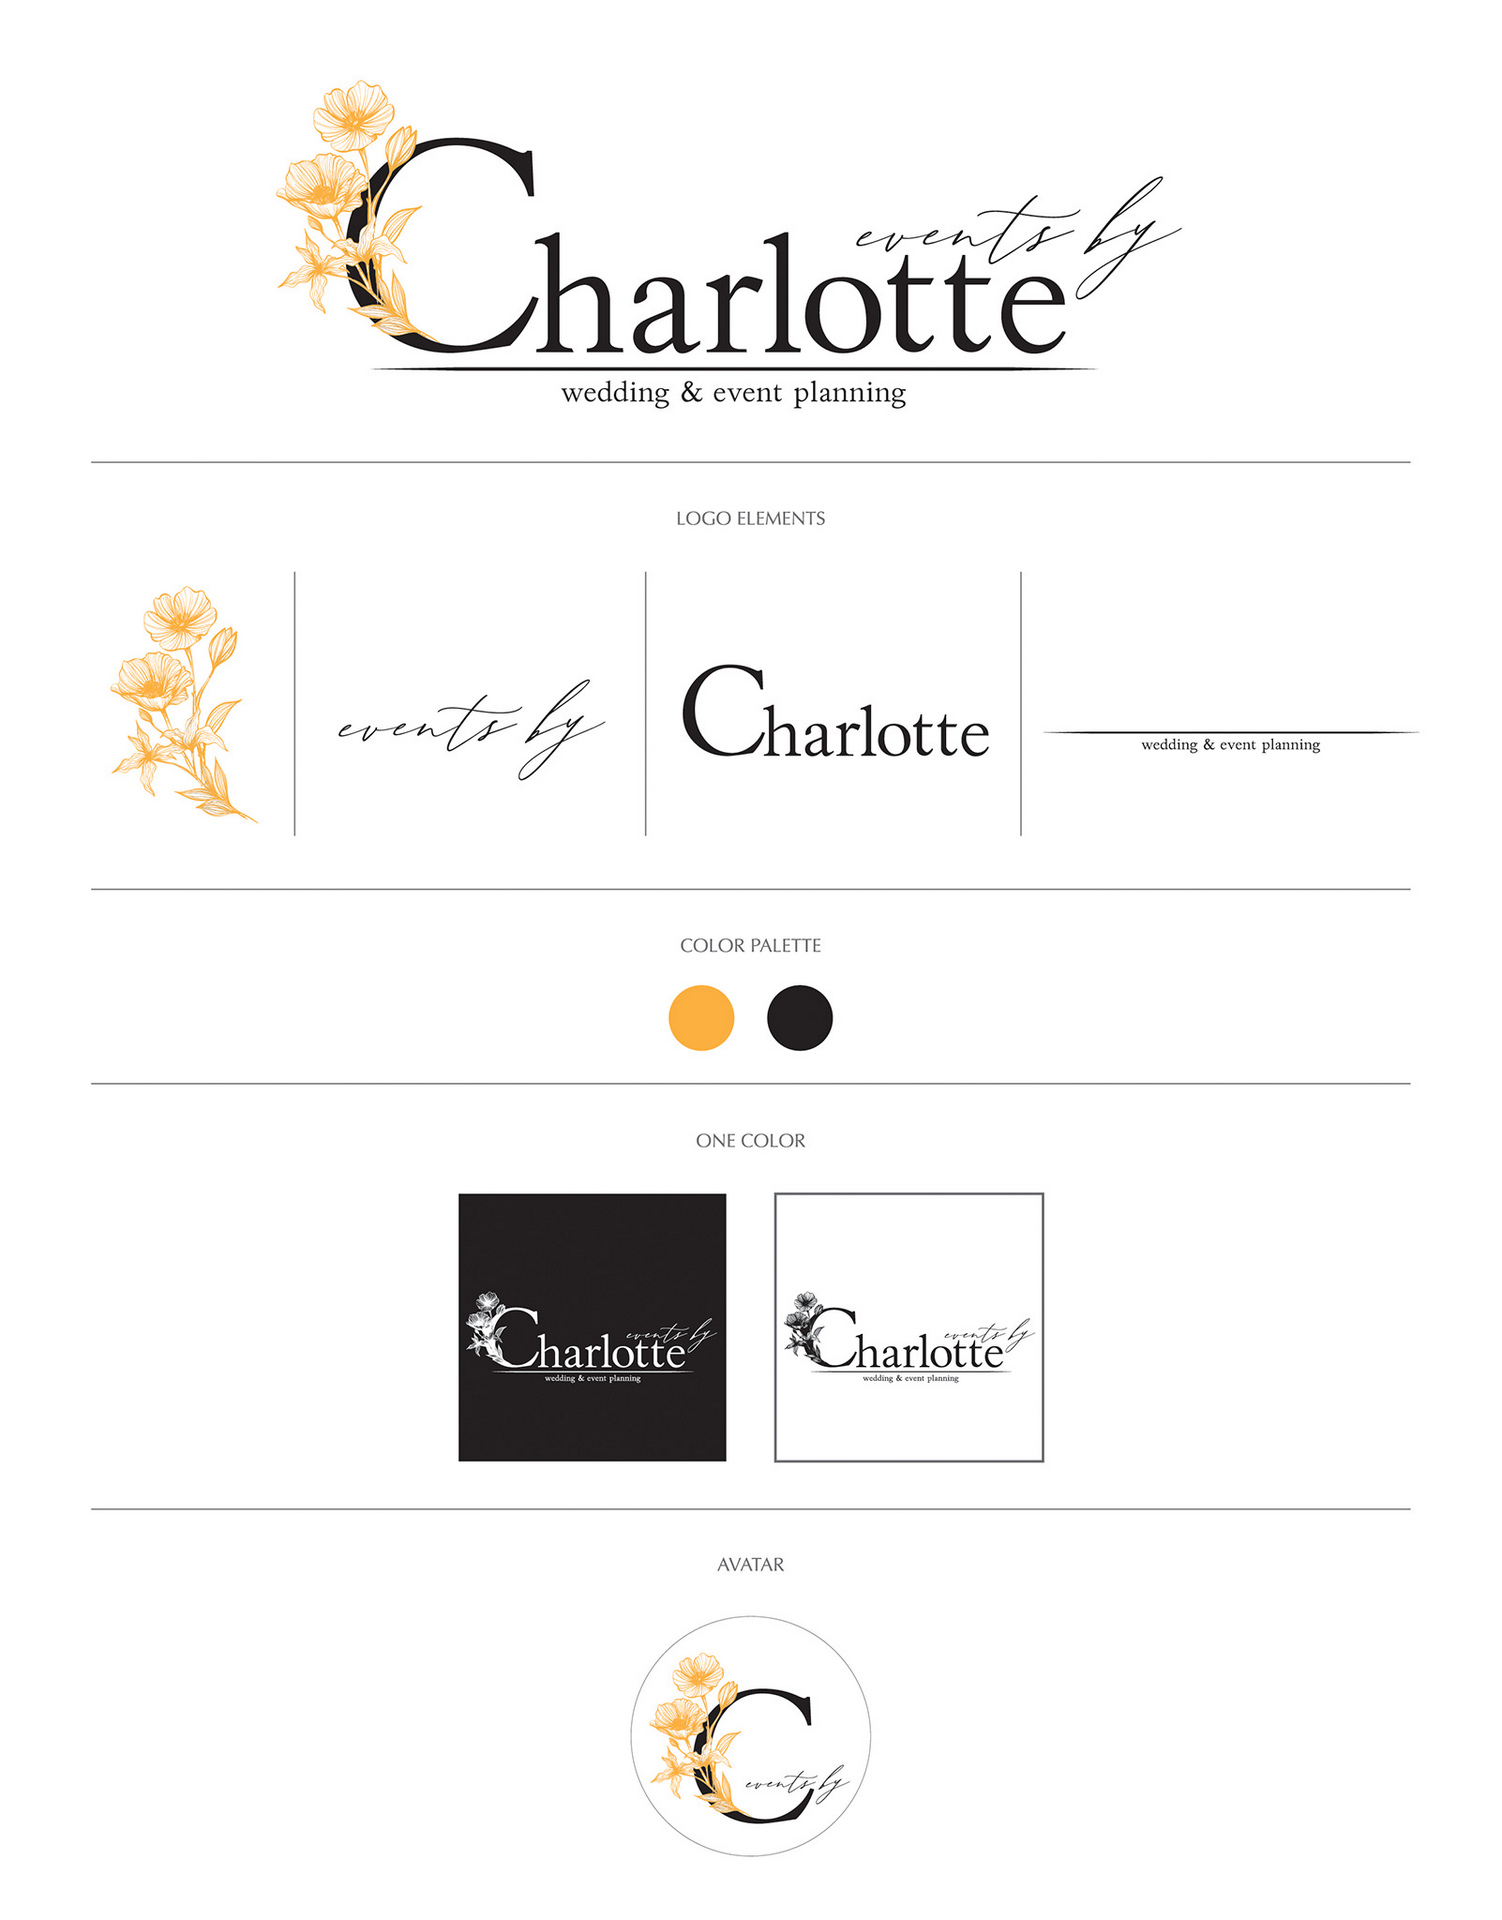 Events by charlotte logo design